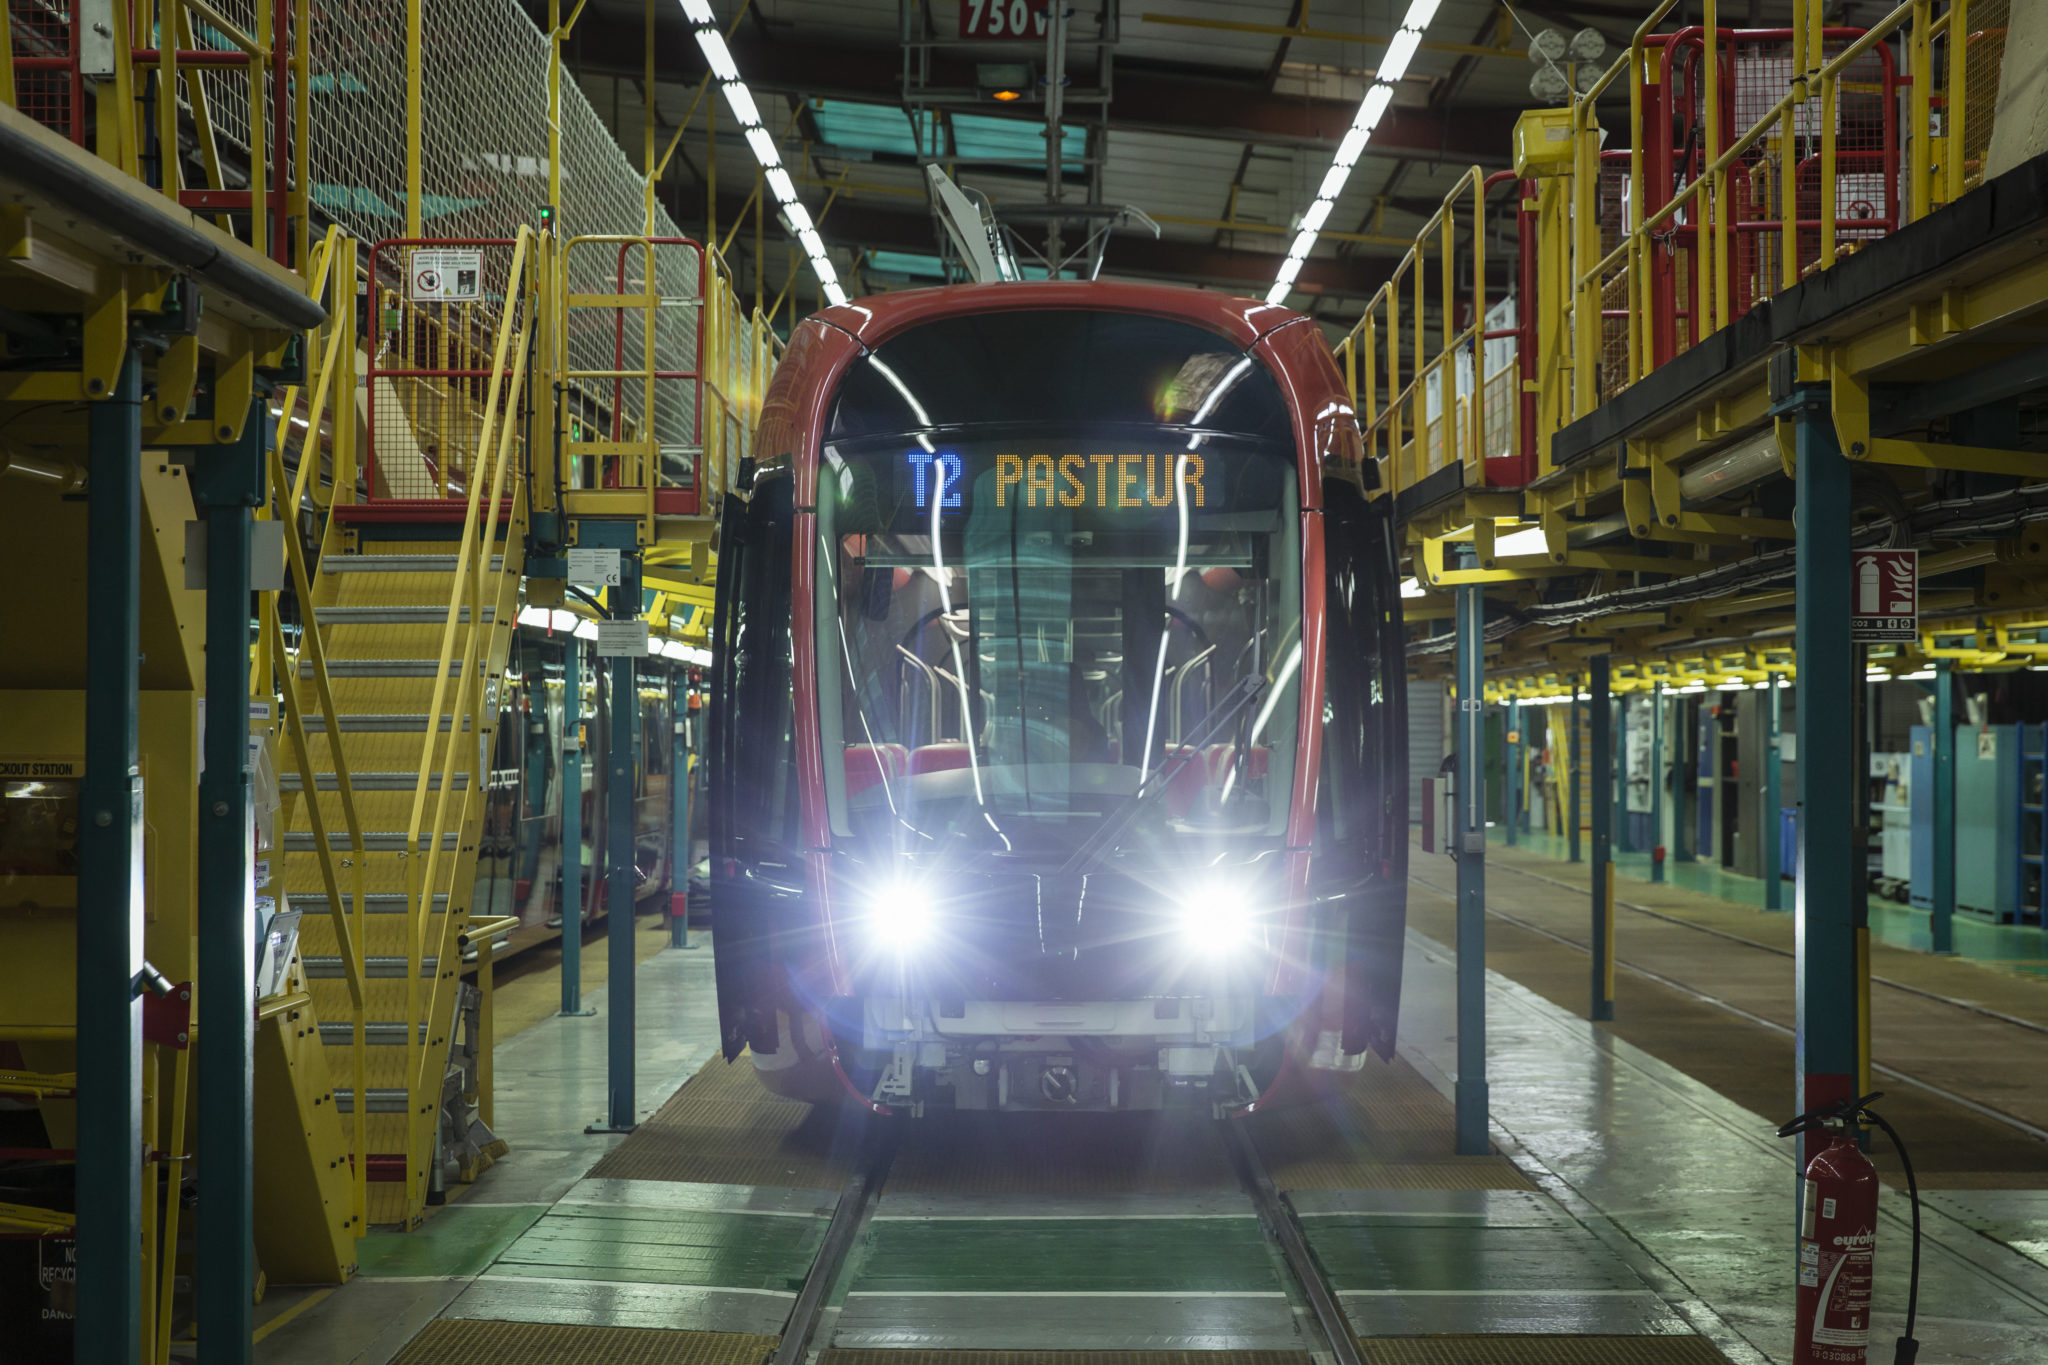 Alstom has provided the trains for the new T2 Nice Airport tram link